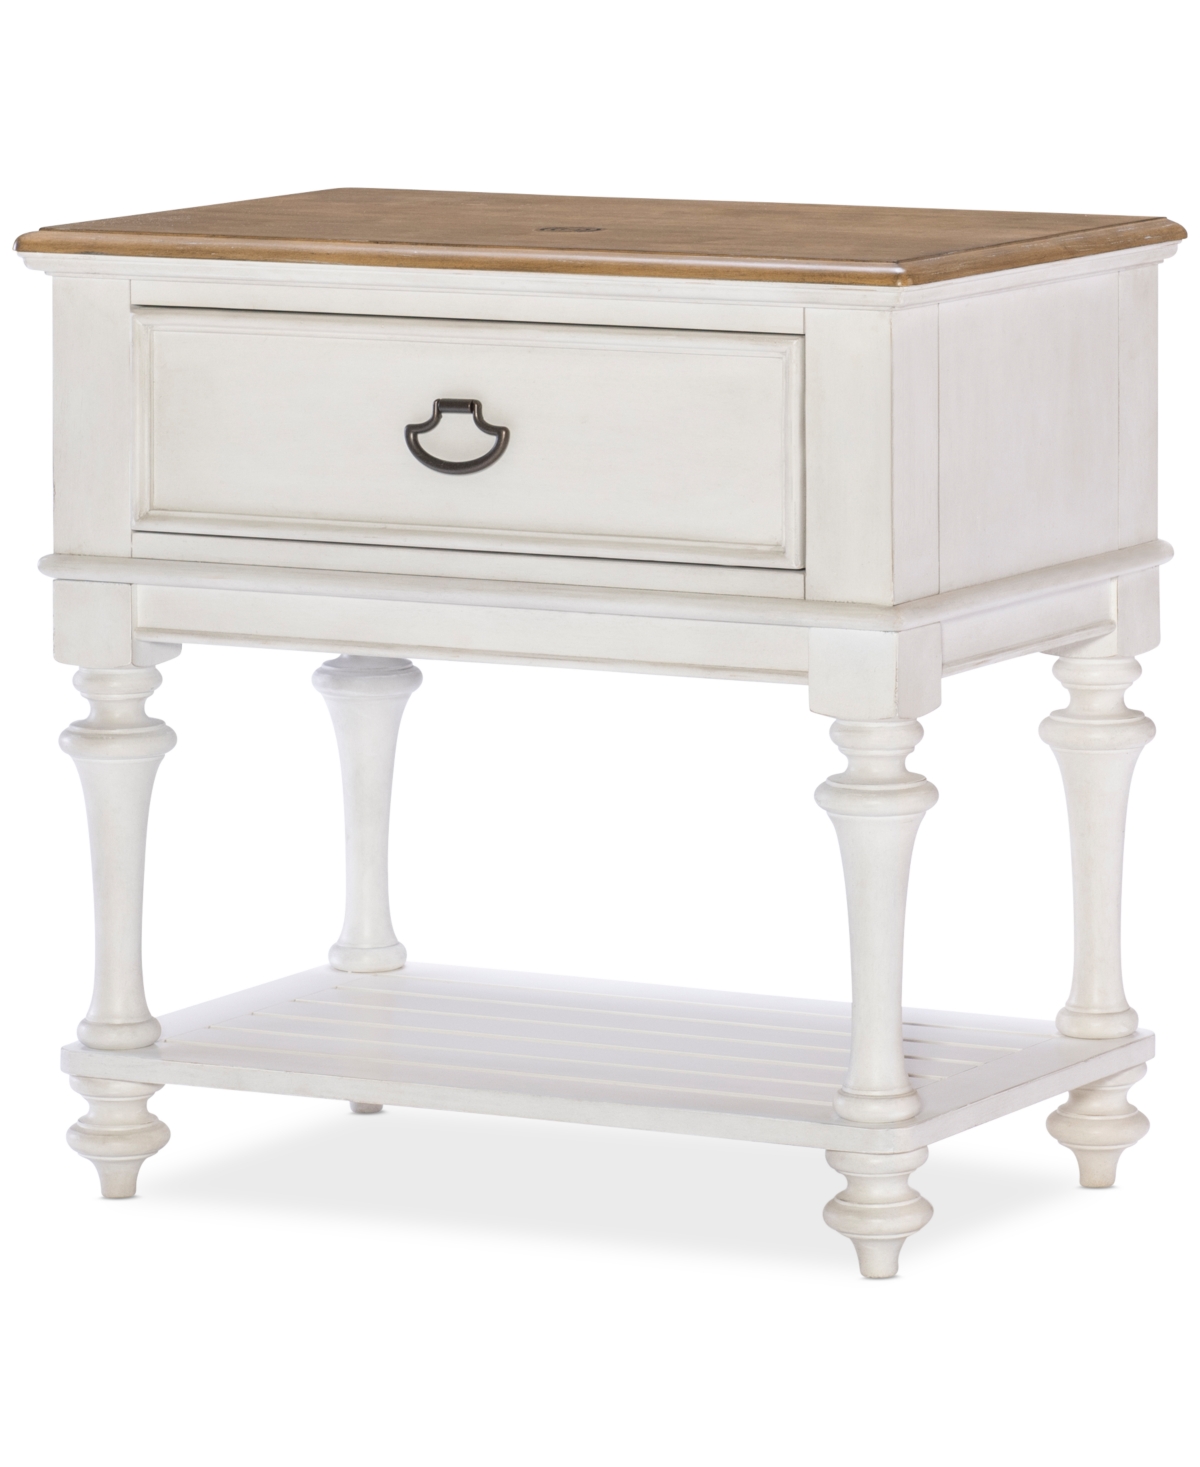 Macy's Mandeville One Drawer Nightstand In White